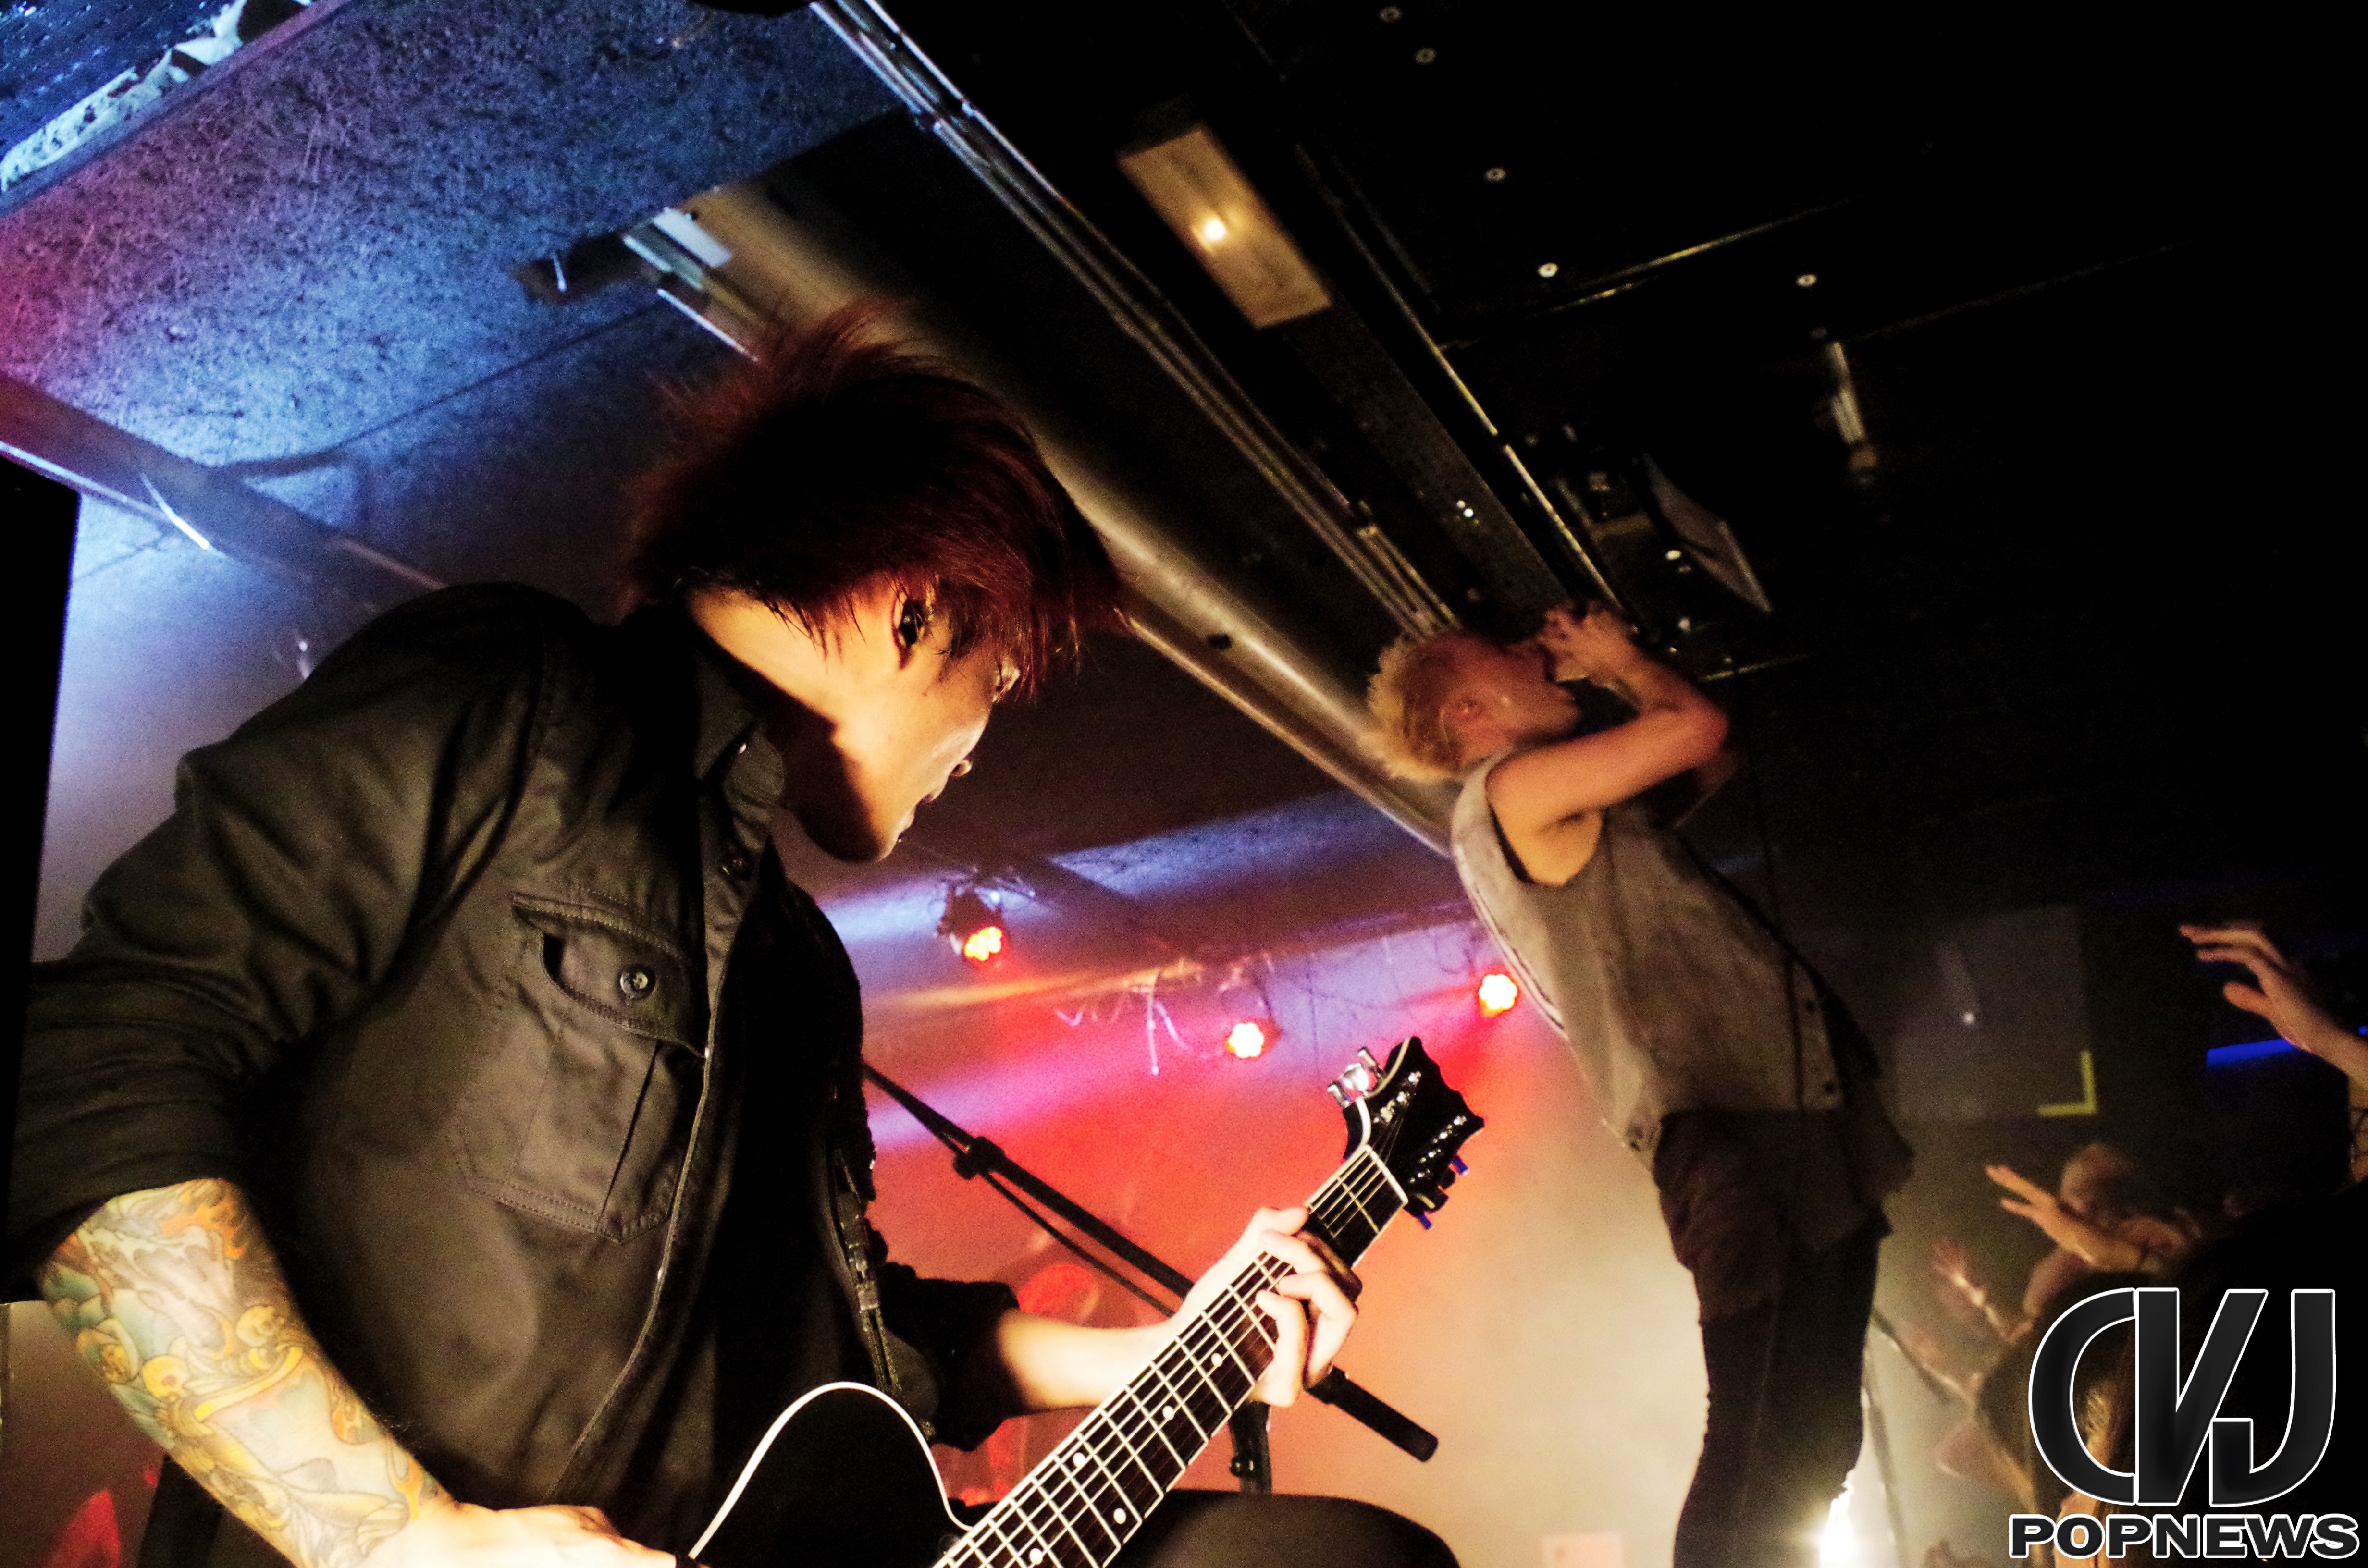 concert_3_coldrain_metal_backstage-by-the-mill_paris_vena_european-tour_headline_wage-war_counting-days_52